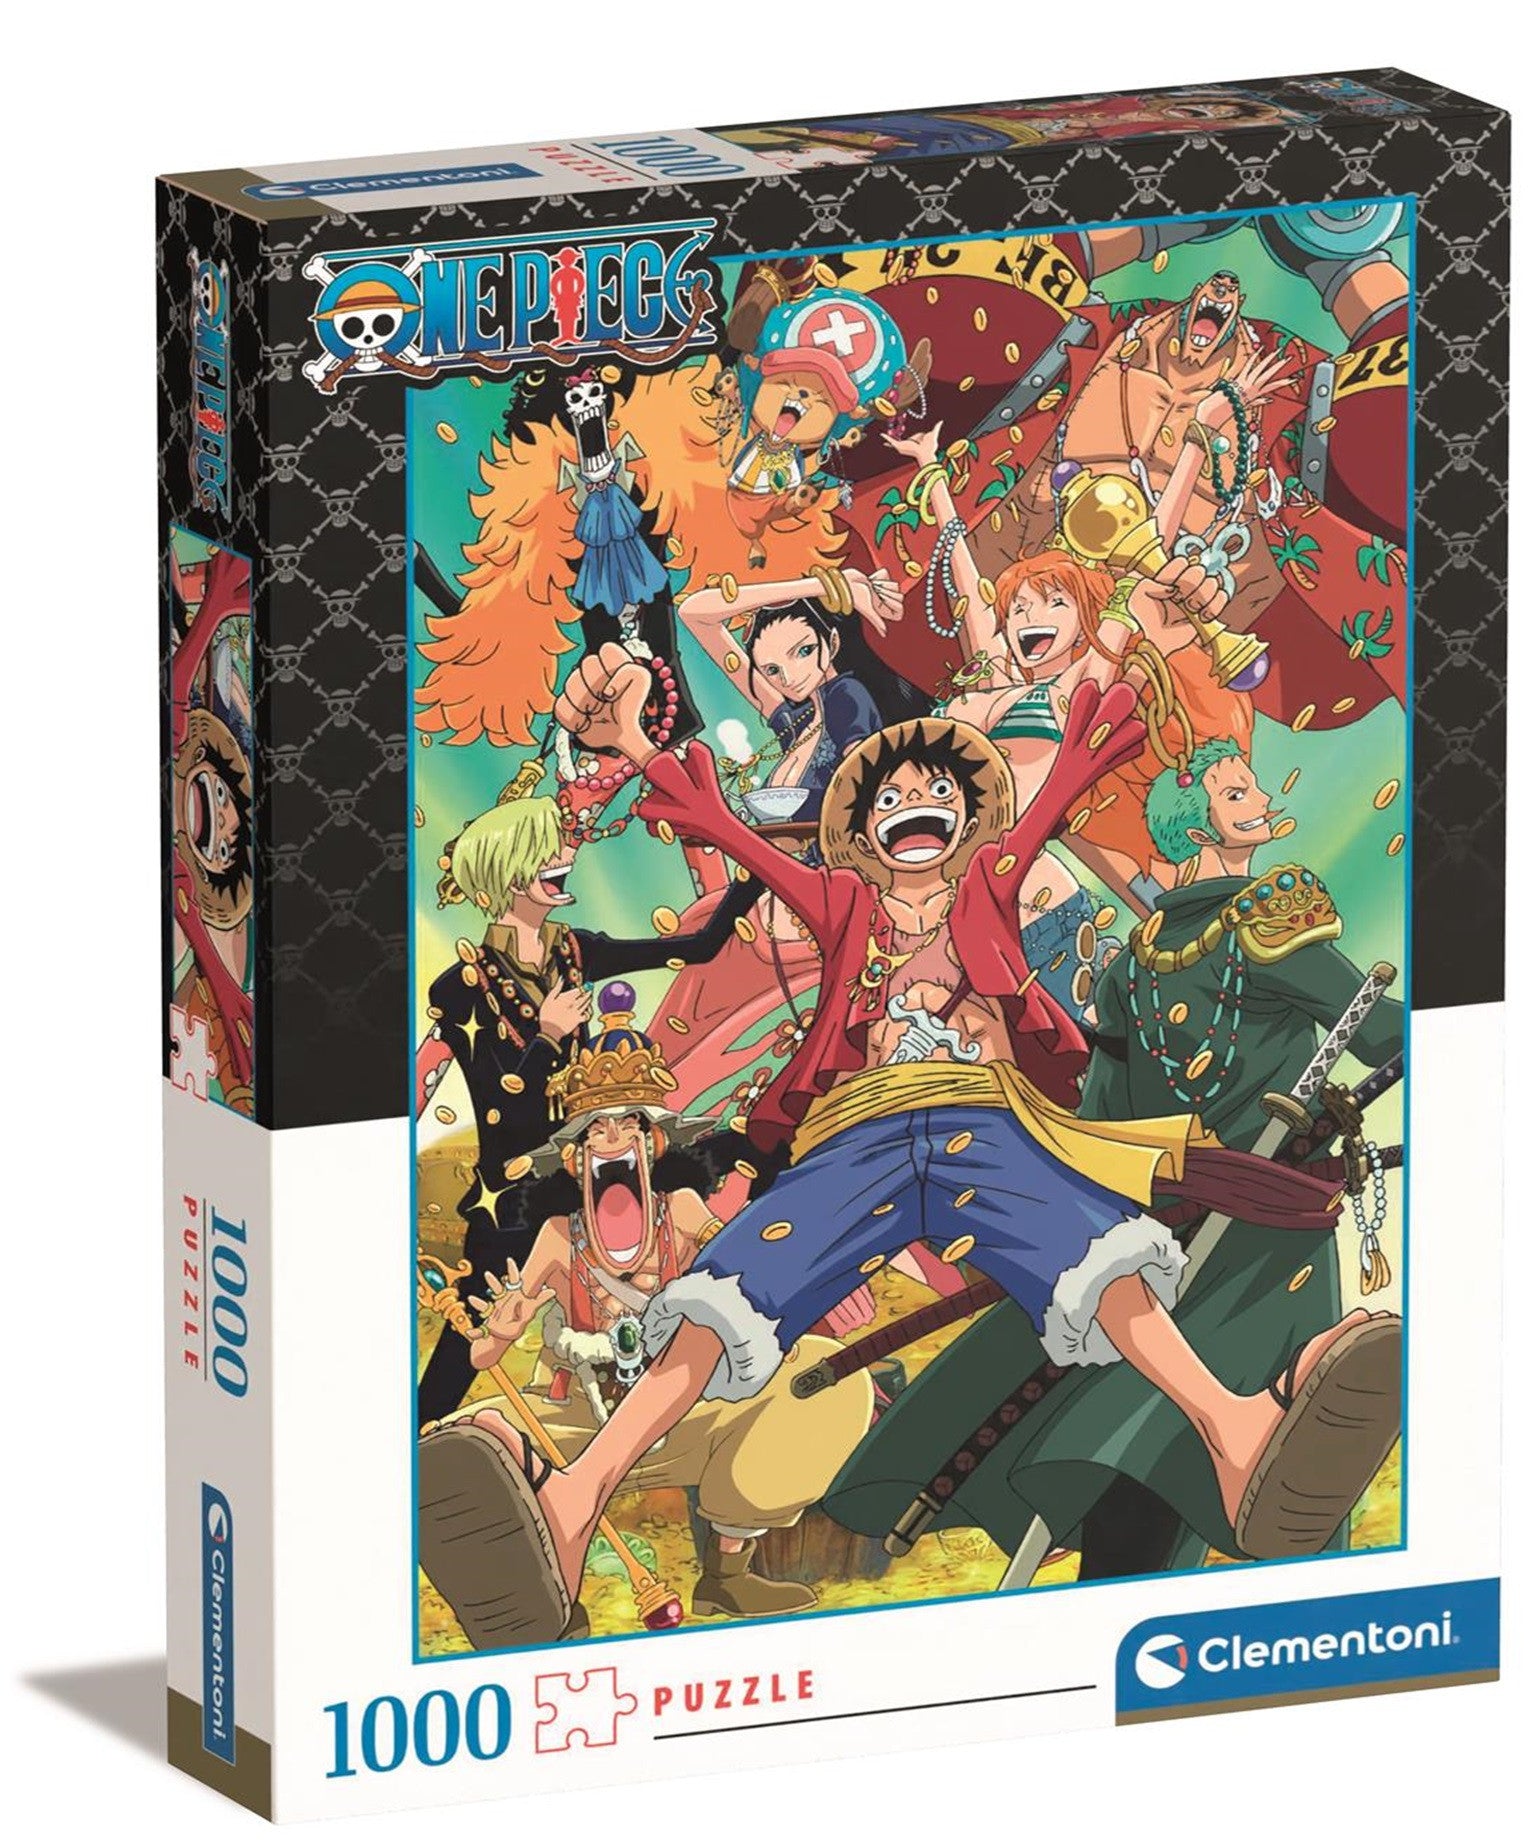 Clementoni One Piece Puzzle 1000 Piece Jigsaw (Preorder) | Good Games